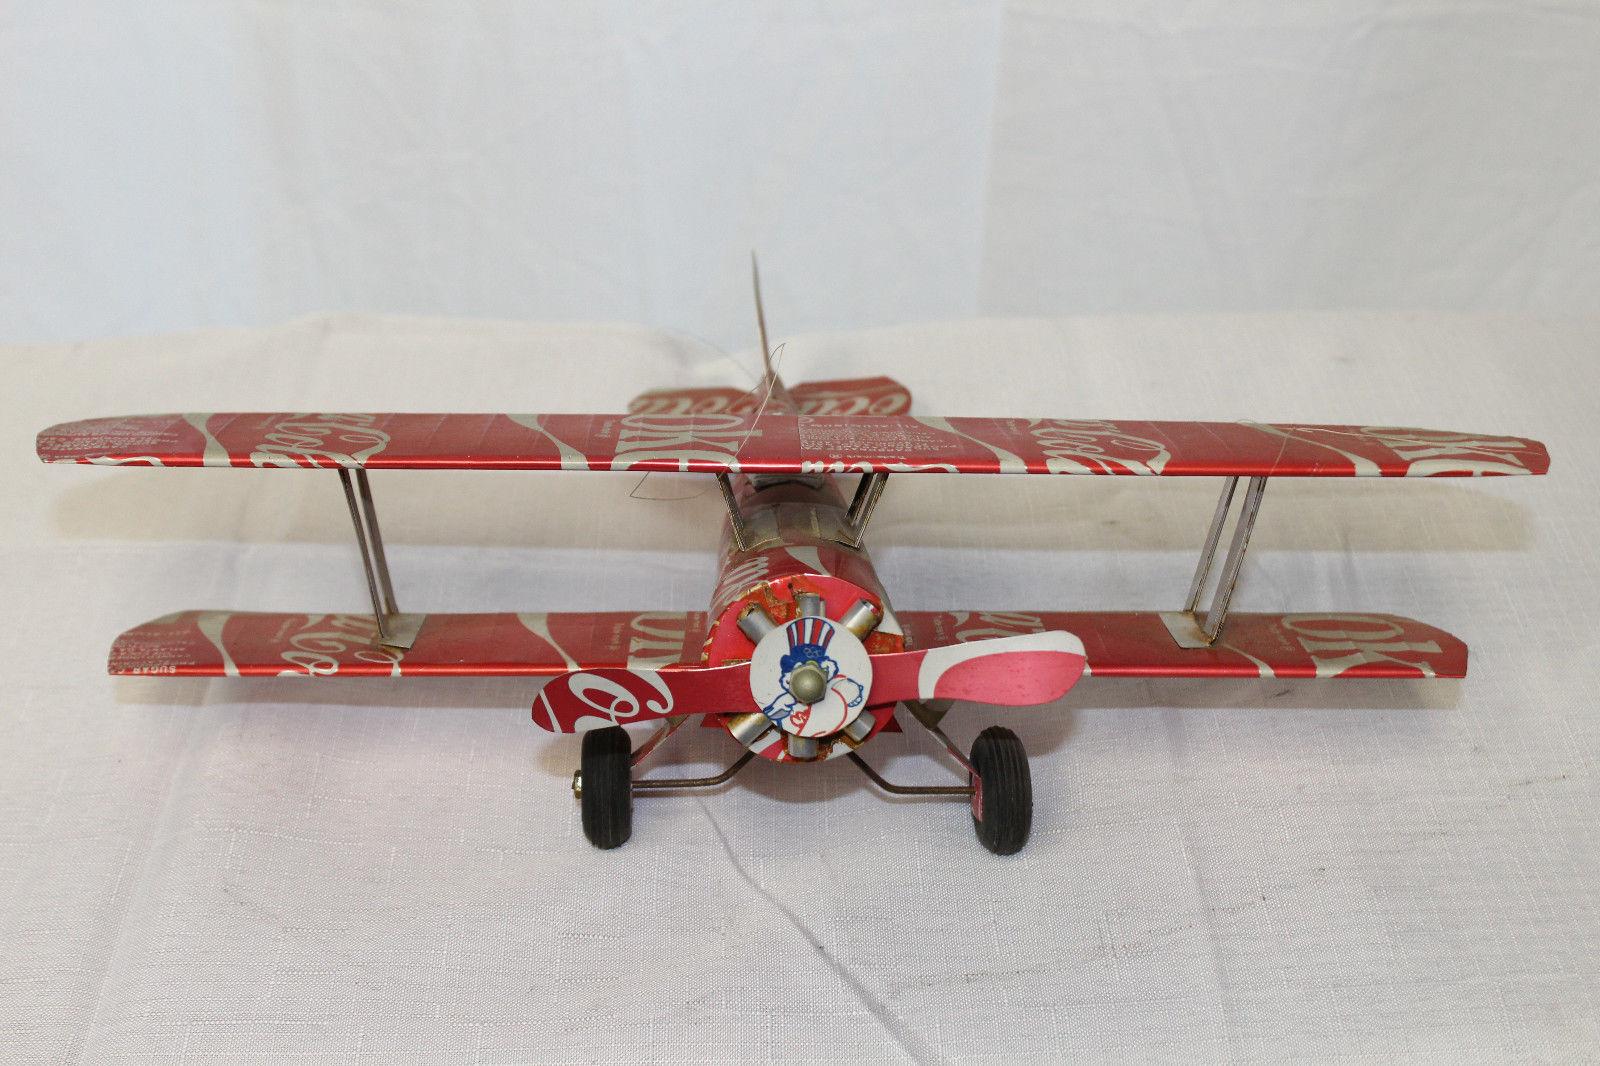 Awesome bi plane that's a custom handmade piece made out of Coca-Cola cans.